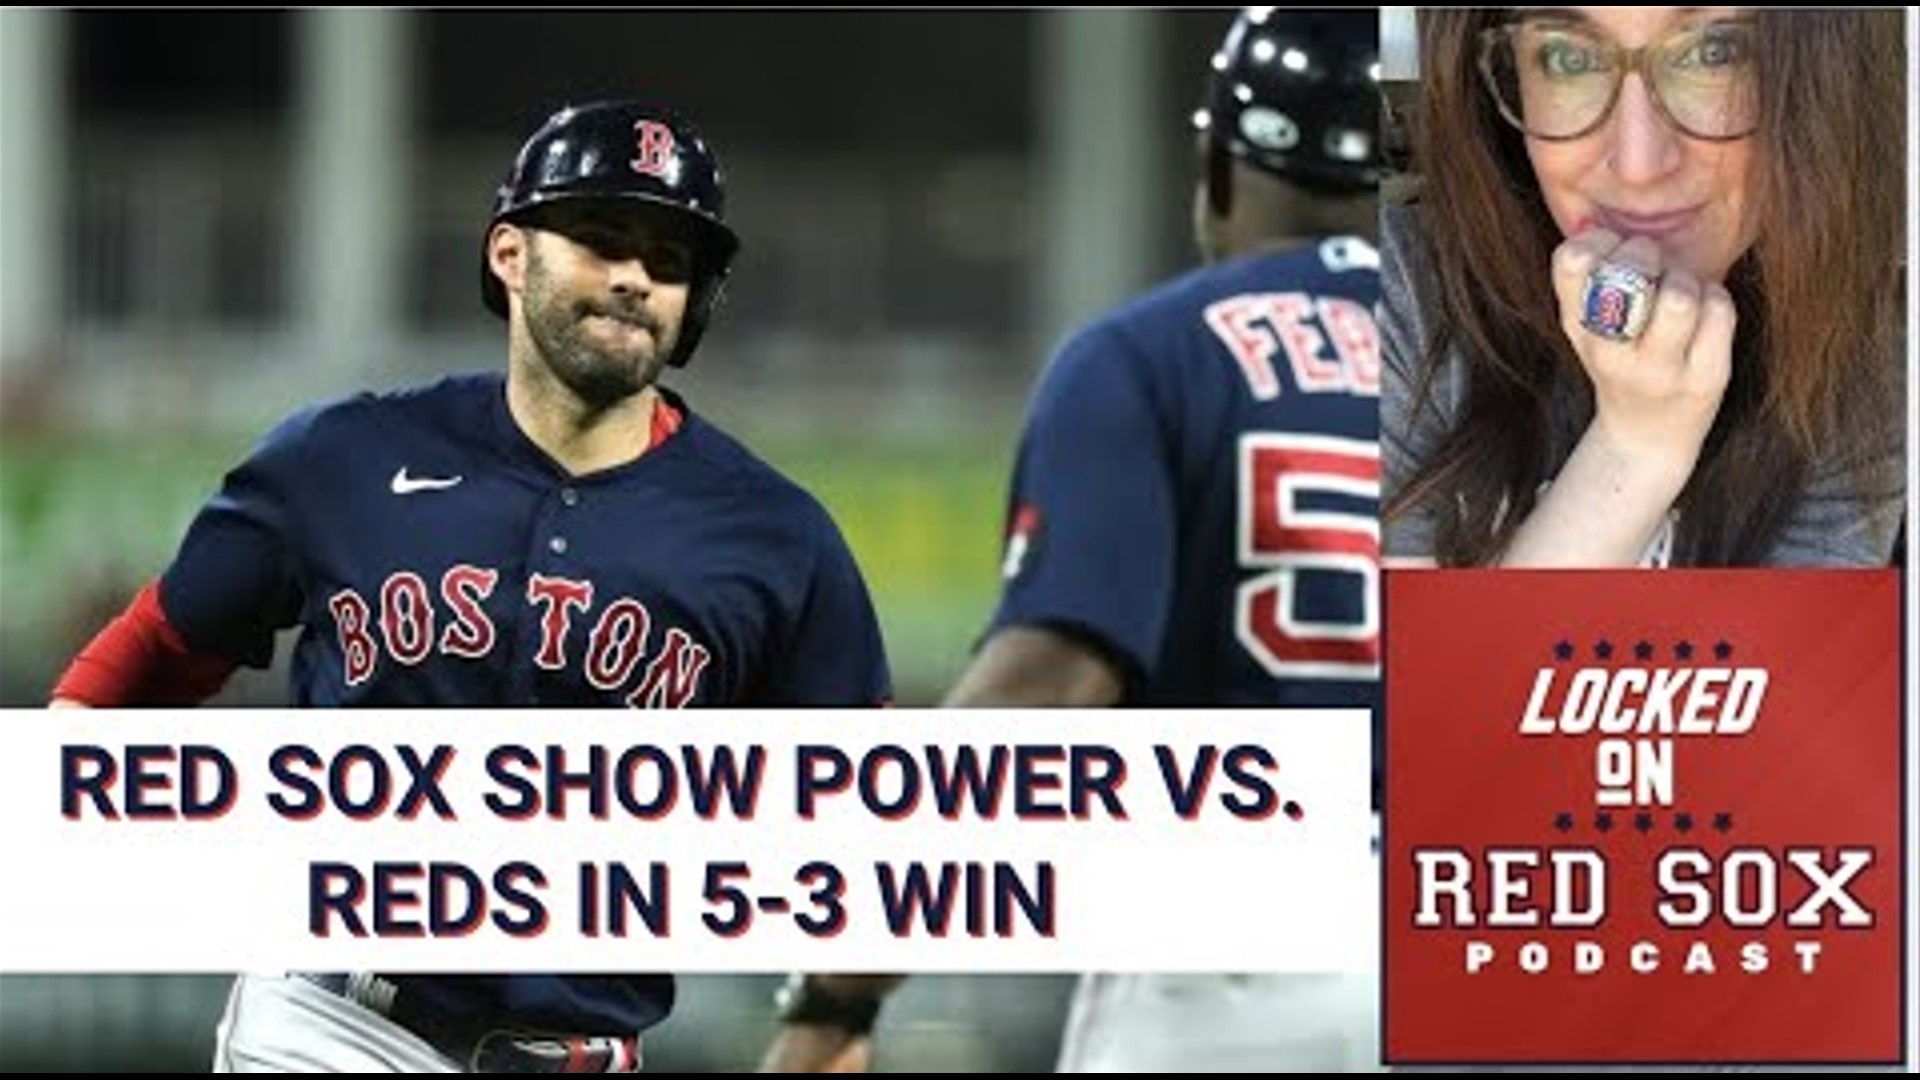 The Boston Red Sox showcased some much-needed power against the Cincinnati Reds on Tuesday night in their 5-3 win at Great American Ball Park.